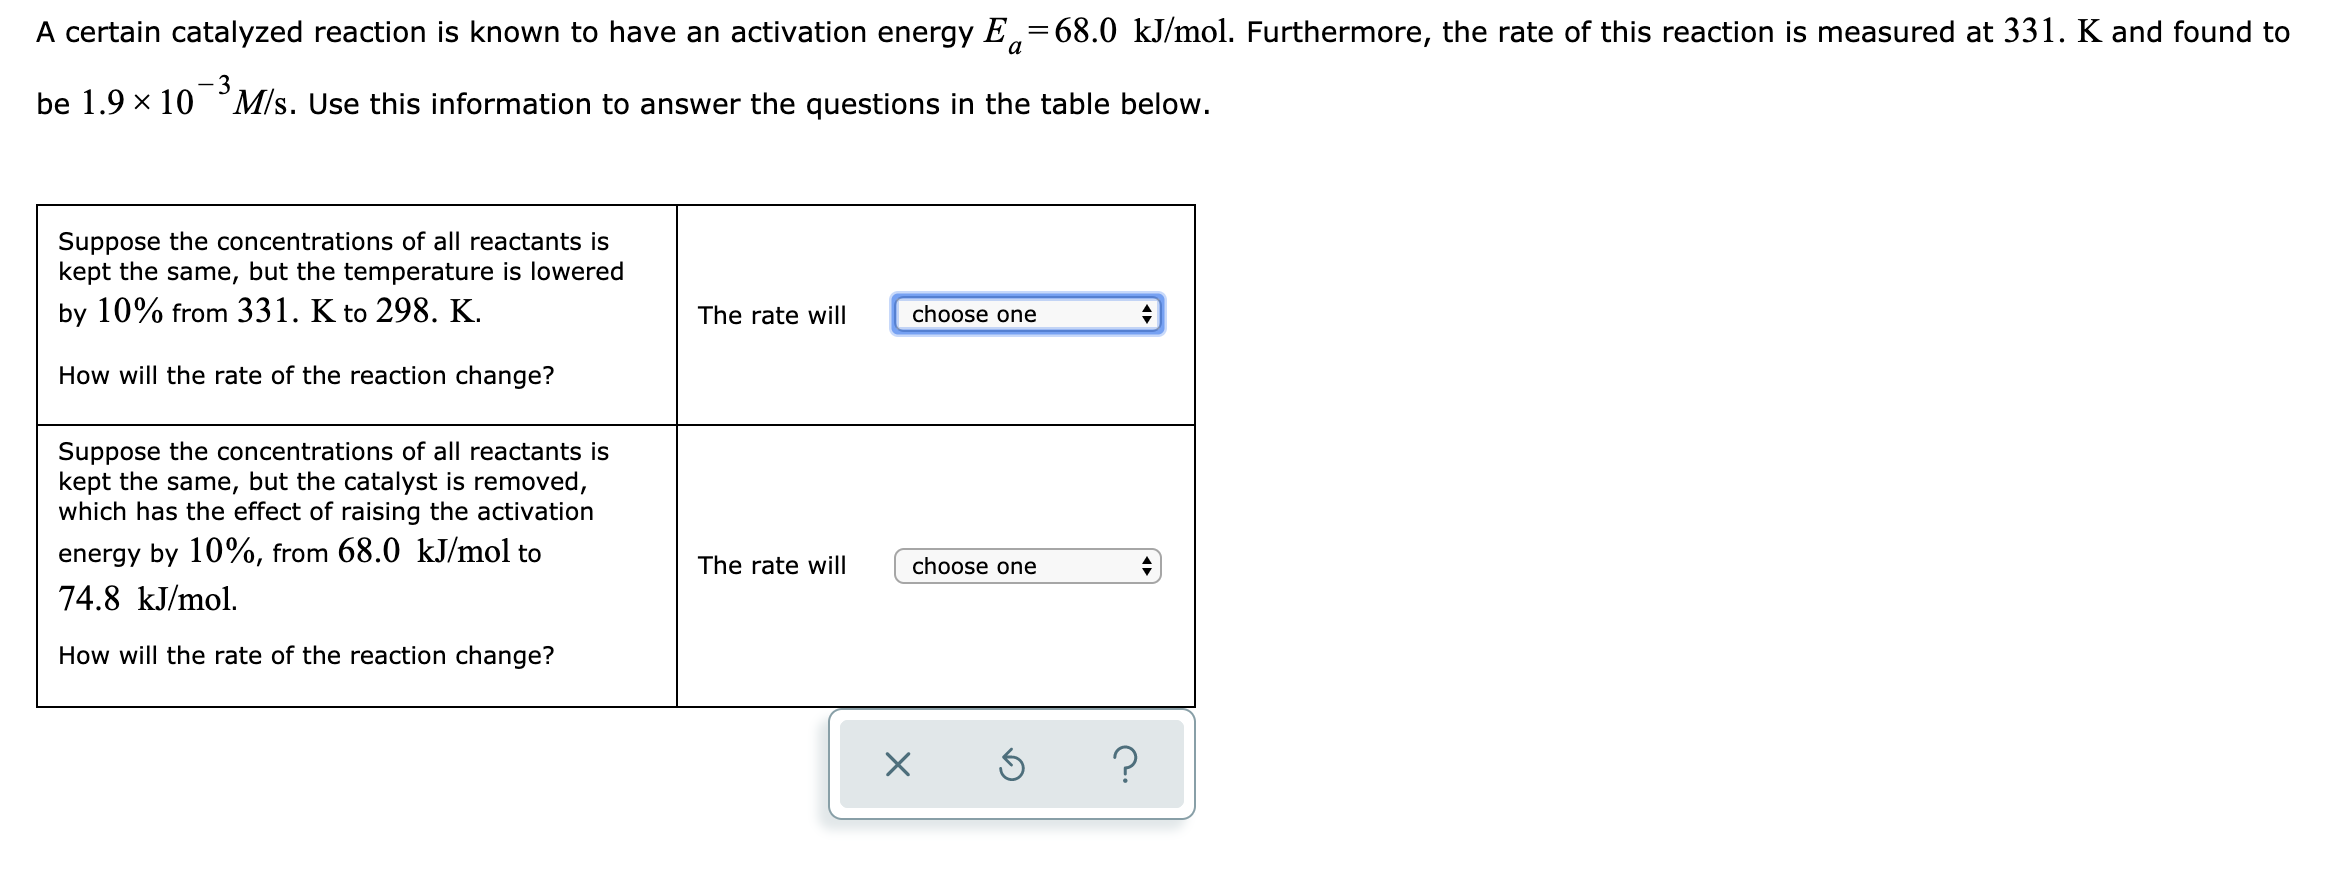 A certain catalyzed reaction is known to have an activation energy E,=68.0 kJ/mol. Furthermore, the rate of this reaction is measured at 331. K and found to
a
be 1.9 x 10 ° M/s. Use this information to answer the questions in the table below.
Suppose the concentrations of all reactants is
kept the same, but the temperature is lowered
by 10% from 331. K to 298. K.
The rate will
choose one
How will the rate of the reaction change?
Suppose the concentrations of all reactants is
kept the same, but the catalyst is removed,
which has the effect of raising the activation
energy by 10%, from 68.0 kJ/mol to
74.8 kJ/mol.
The rate will
choose one
How will the rate of the reaction change?
